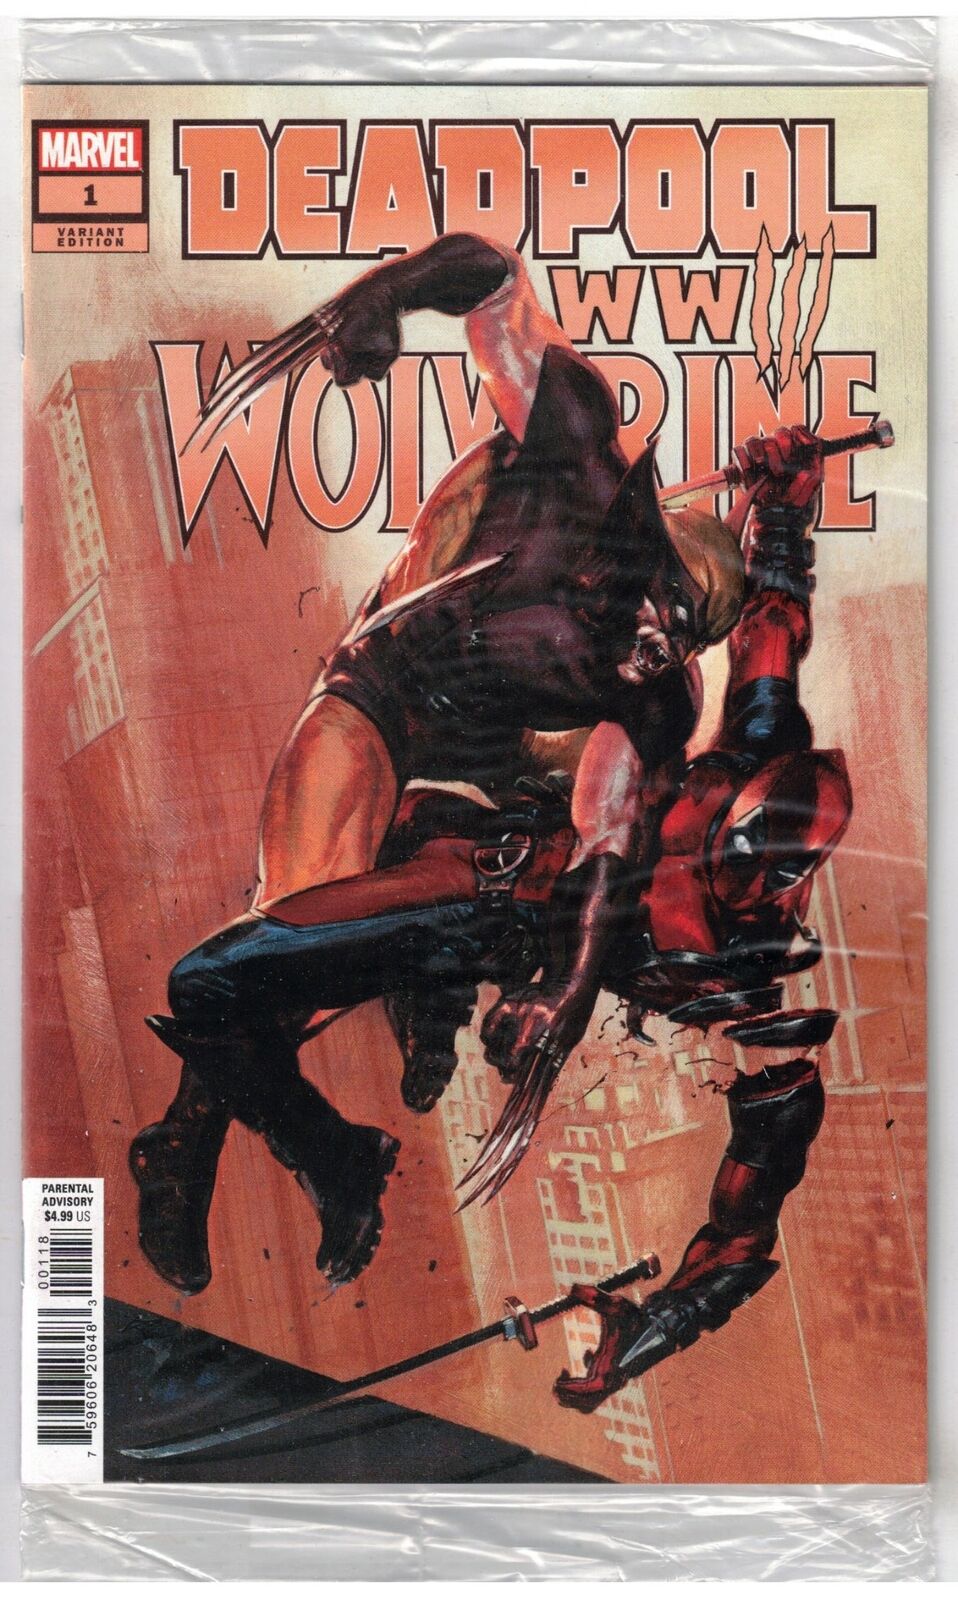 DEADPOOL & WOLVERINE WWIII #1- 1 PER STORE DELL'OTTO POLYBAG VARIANT- MARVEL